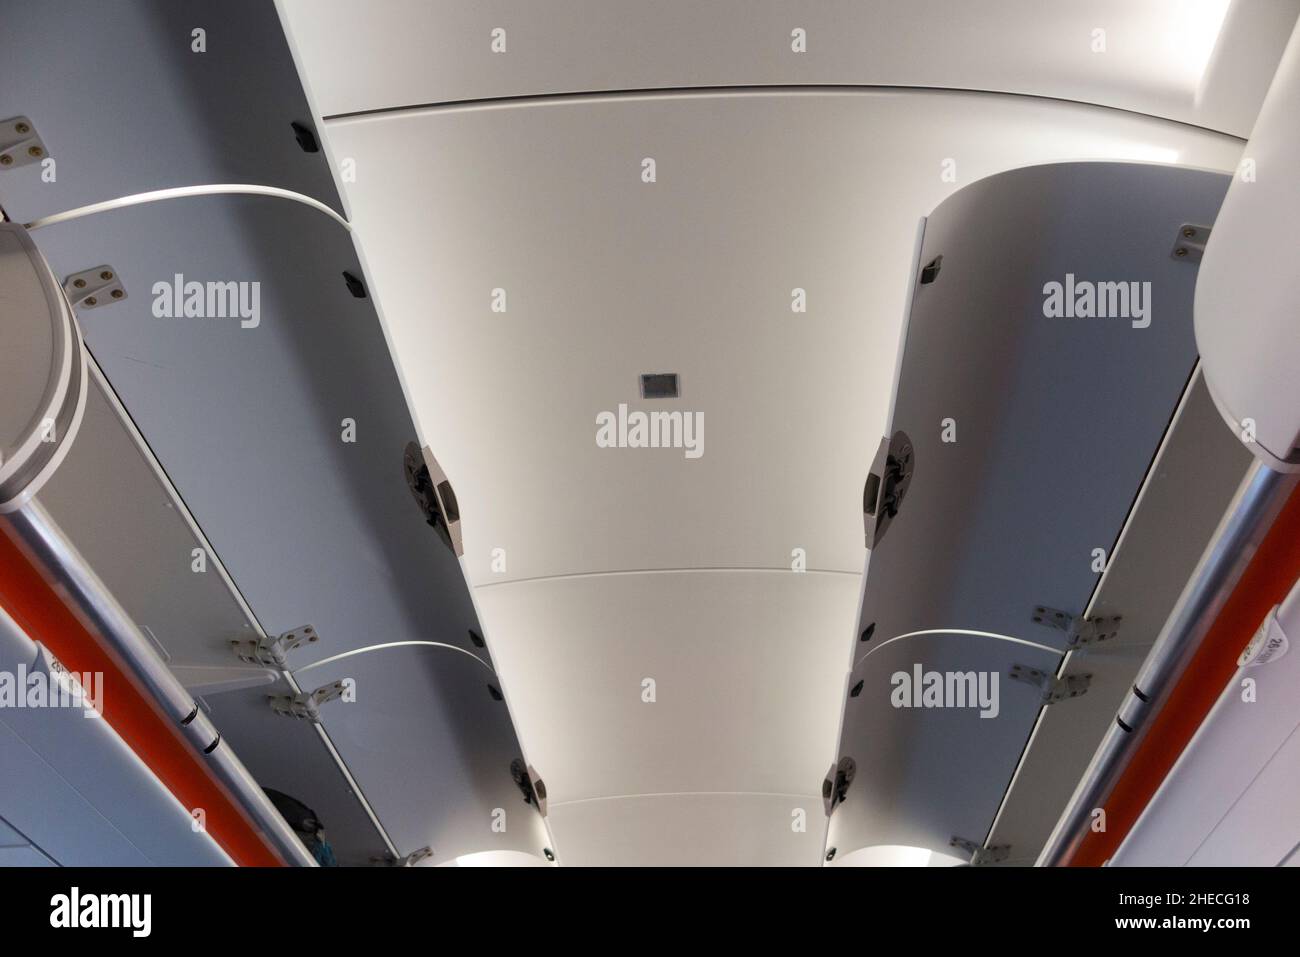 Overhead passenger locker / lockers / compartment / compartments for stowing passengers bags cabin luggage, either side of the ceiling, on an Easyjet Airbus A320 or A319 plane. (128) Stock Photo